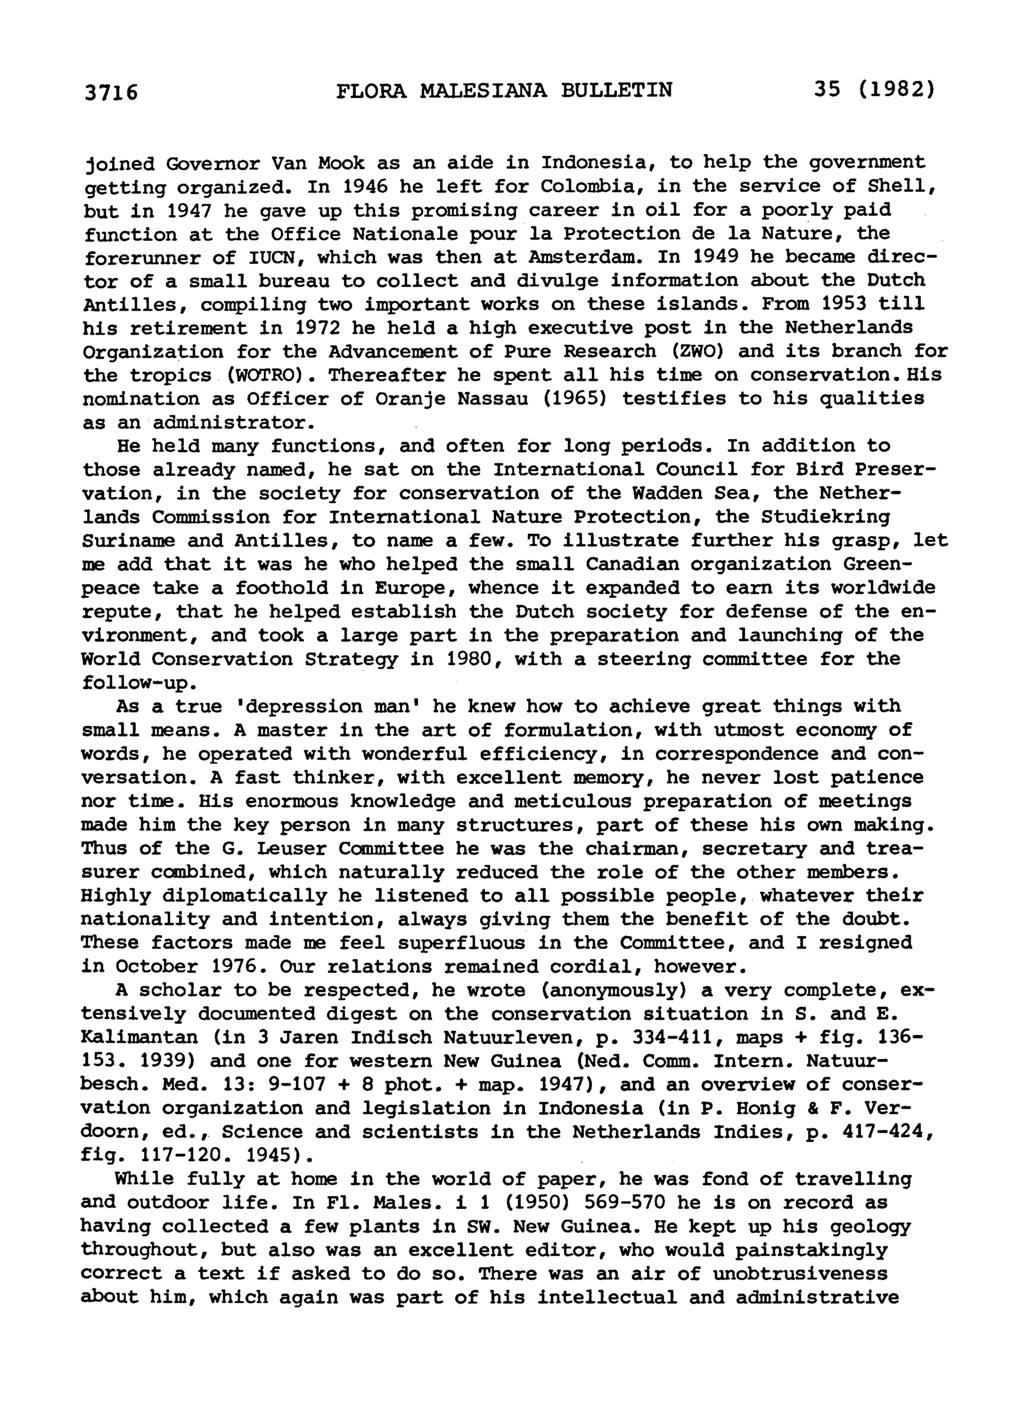 3716 FLORA MALESIANA BULLETIN 35 (1982) joined Governor Van Mook as an aide in Indonesia, to help the government getting organized.